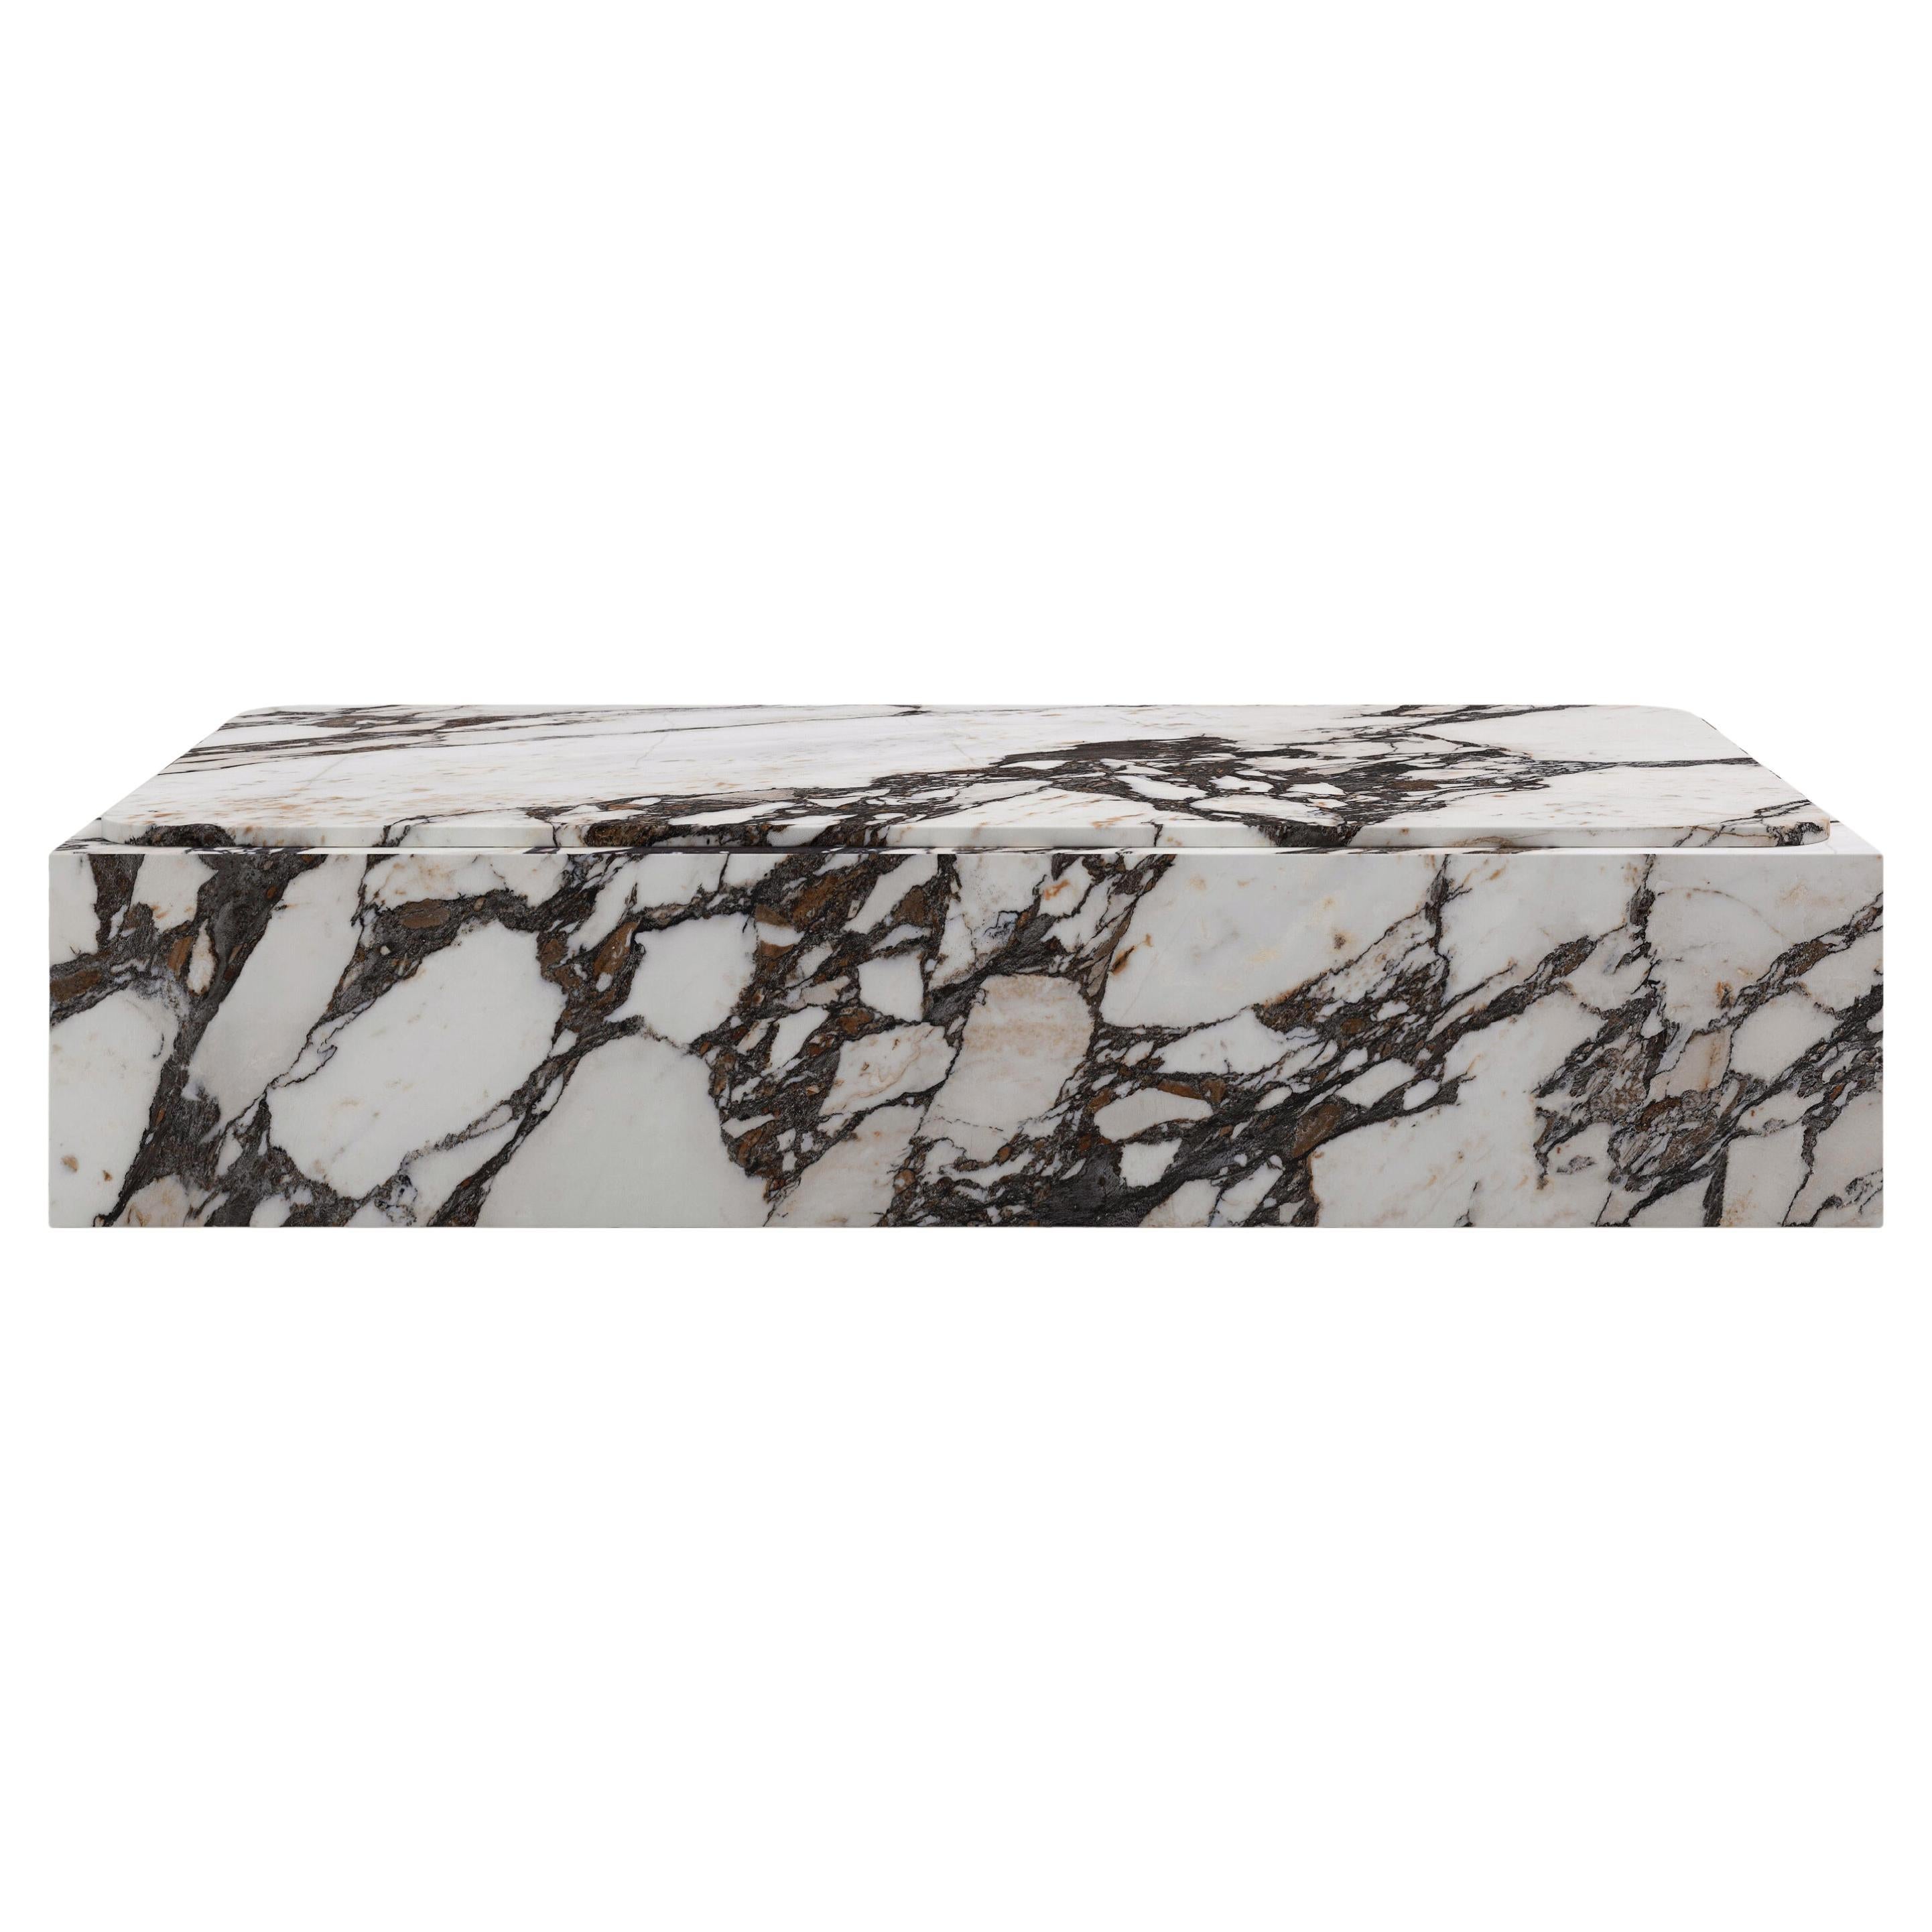 FORM(LA) Cubo Rectangle Plinth Coffee Table 48”L x 30”W x 13”H Calacatta Marble  For Sale